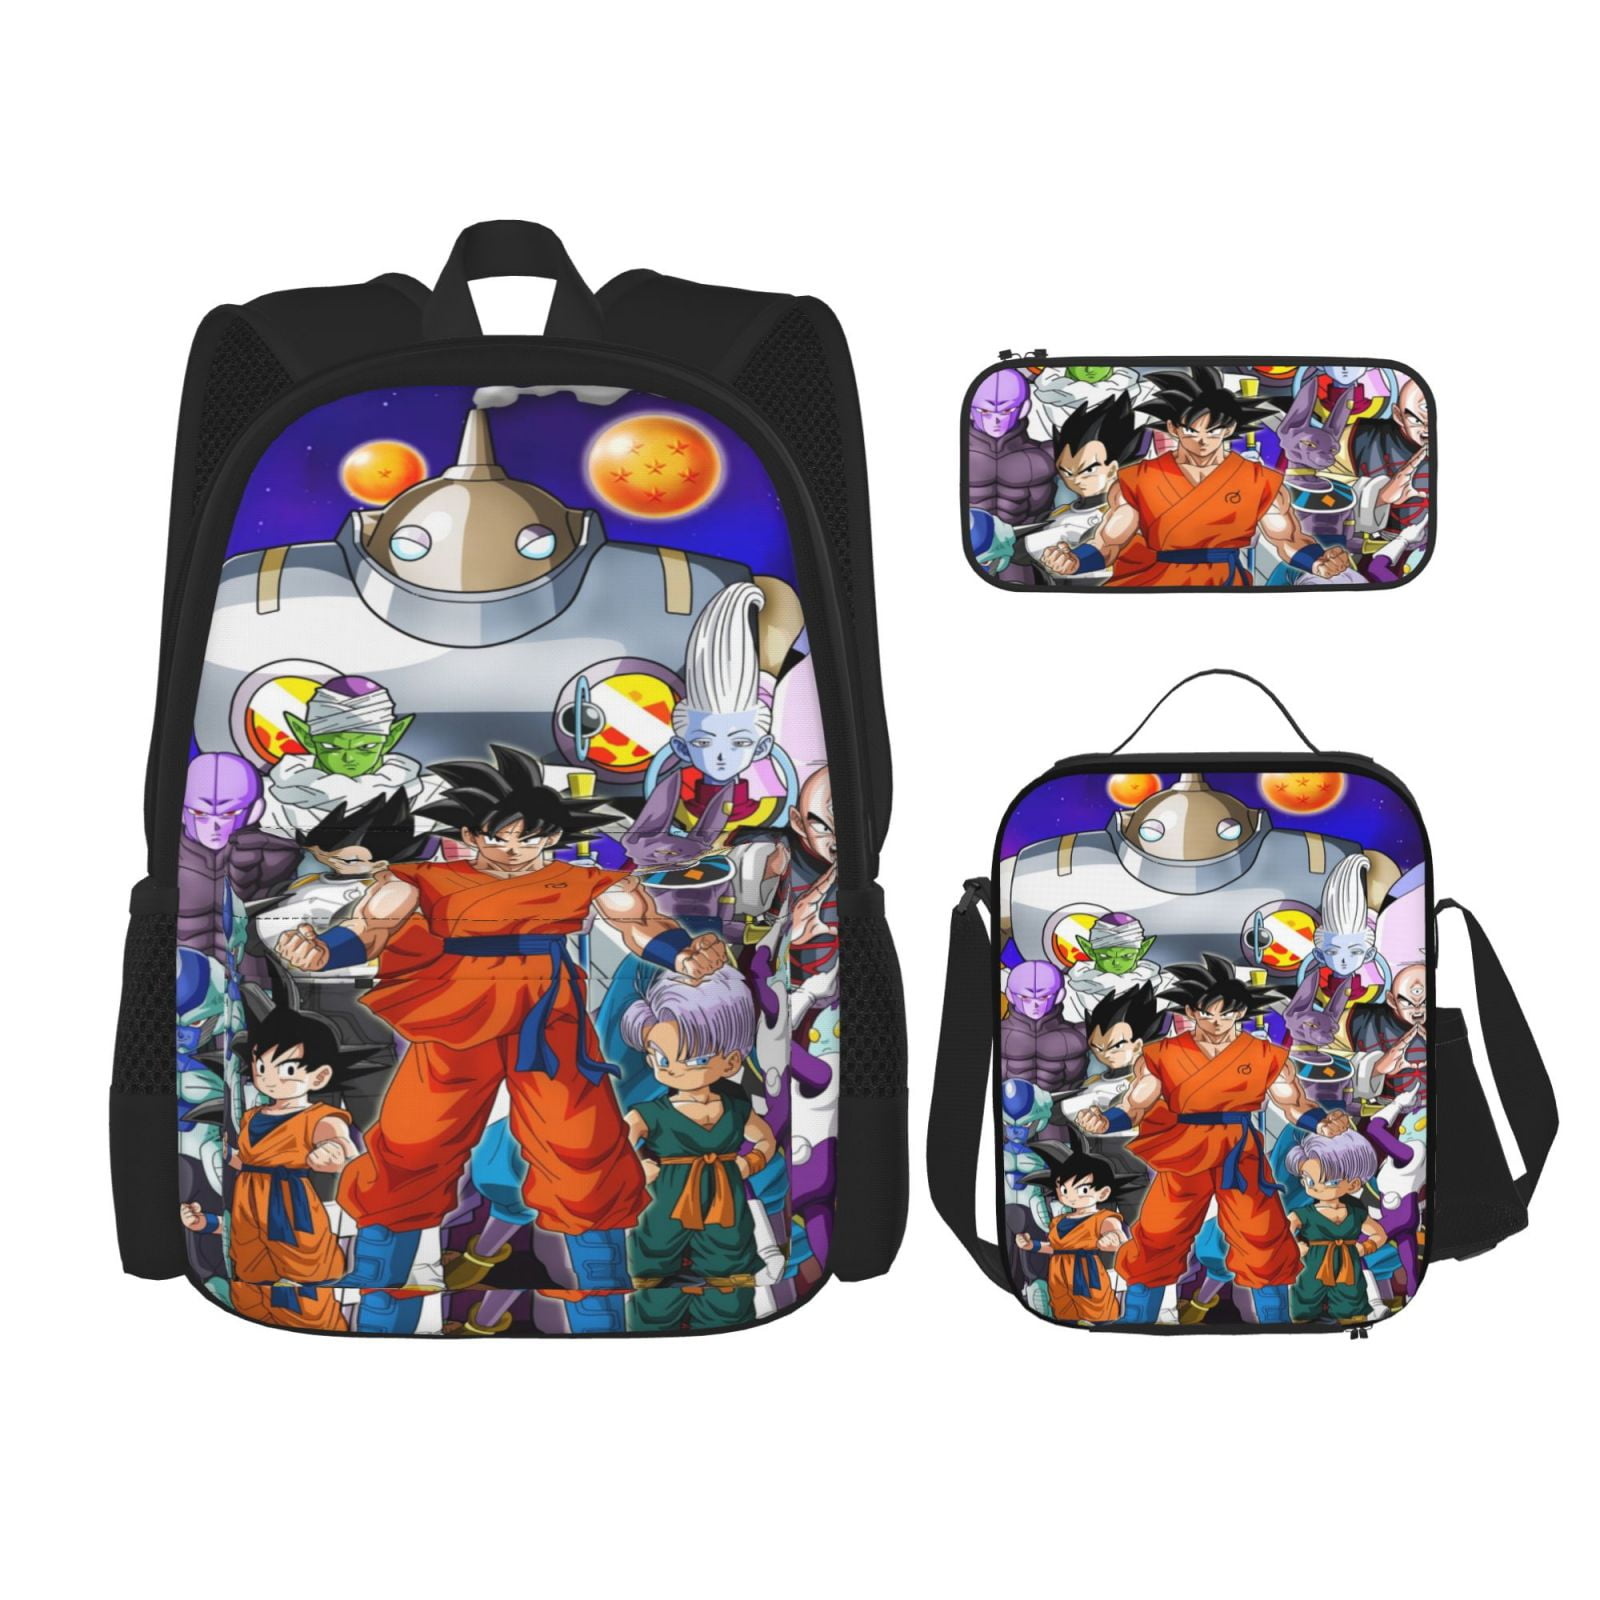 one size Dragons 3 Lunch Bag Multi 600D polyester